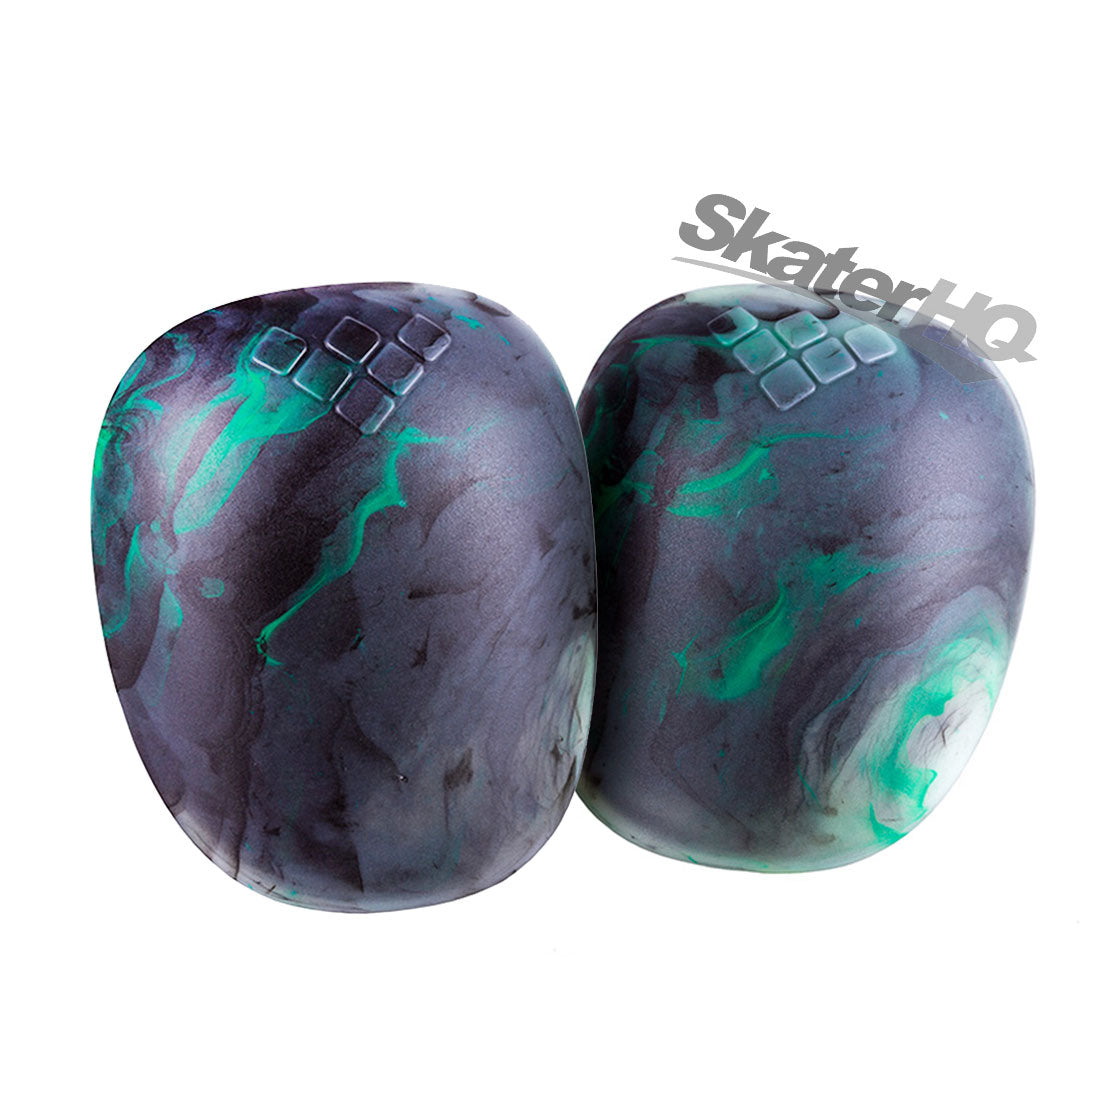 GAIN Shield Replacement Caps - Green/Black Swirl Protective Gear